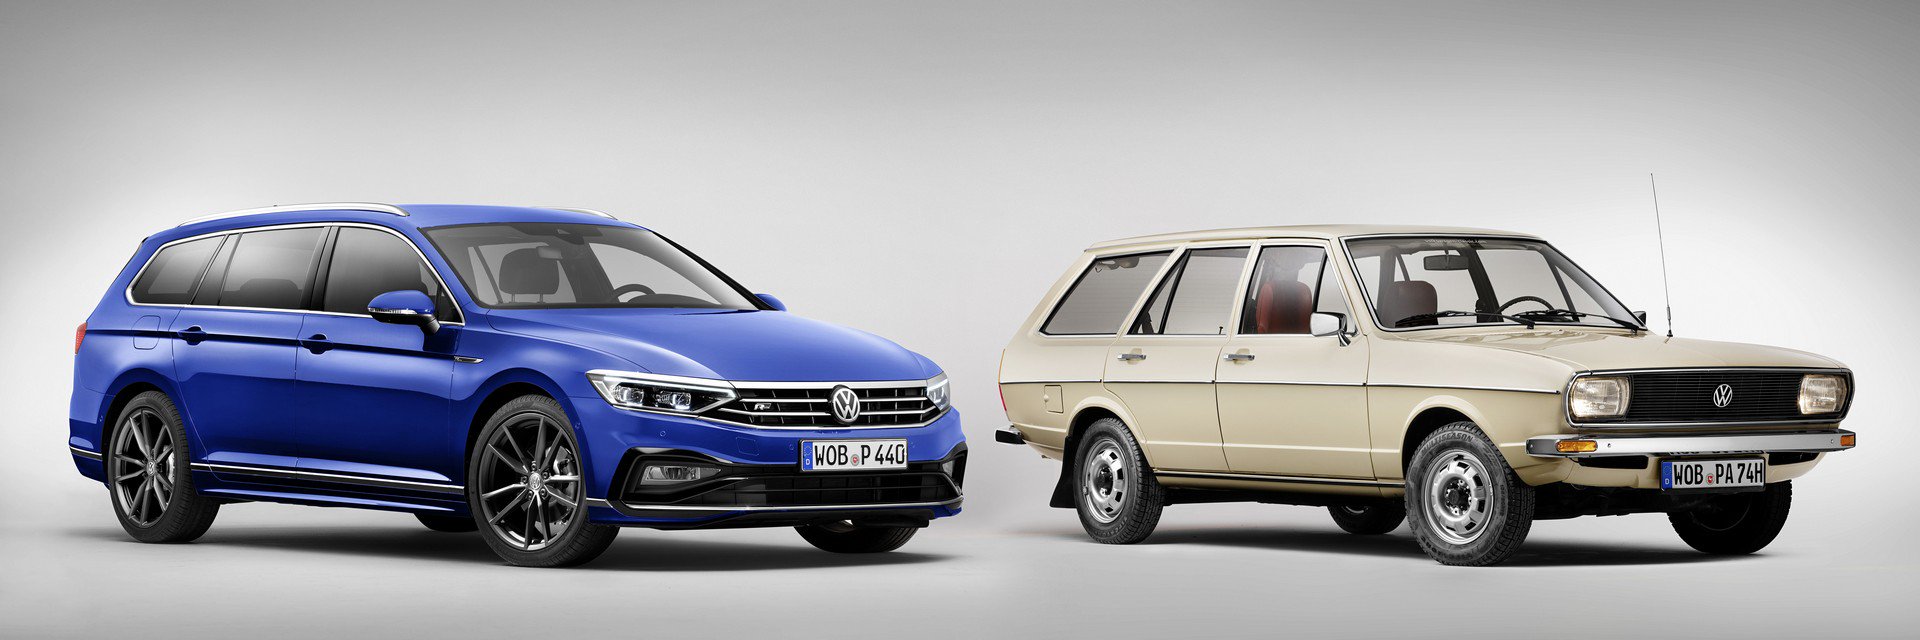 european-vw-passat-sedan-reportedly-axed-sources-say-only-wagon-will-survive_1.jpg